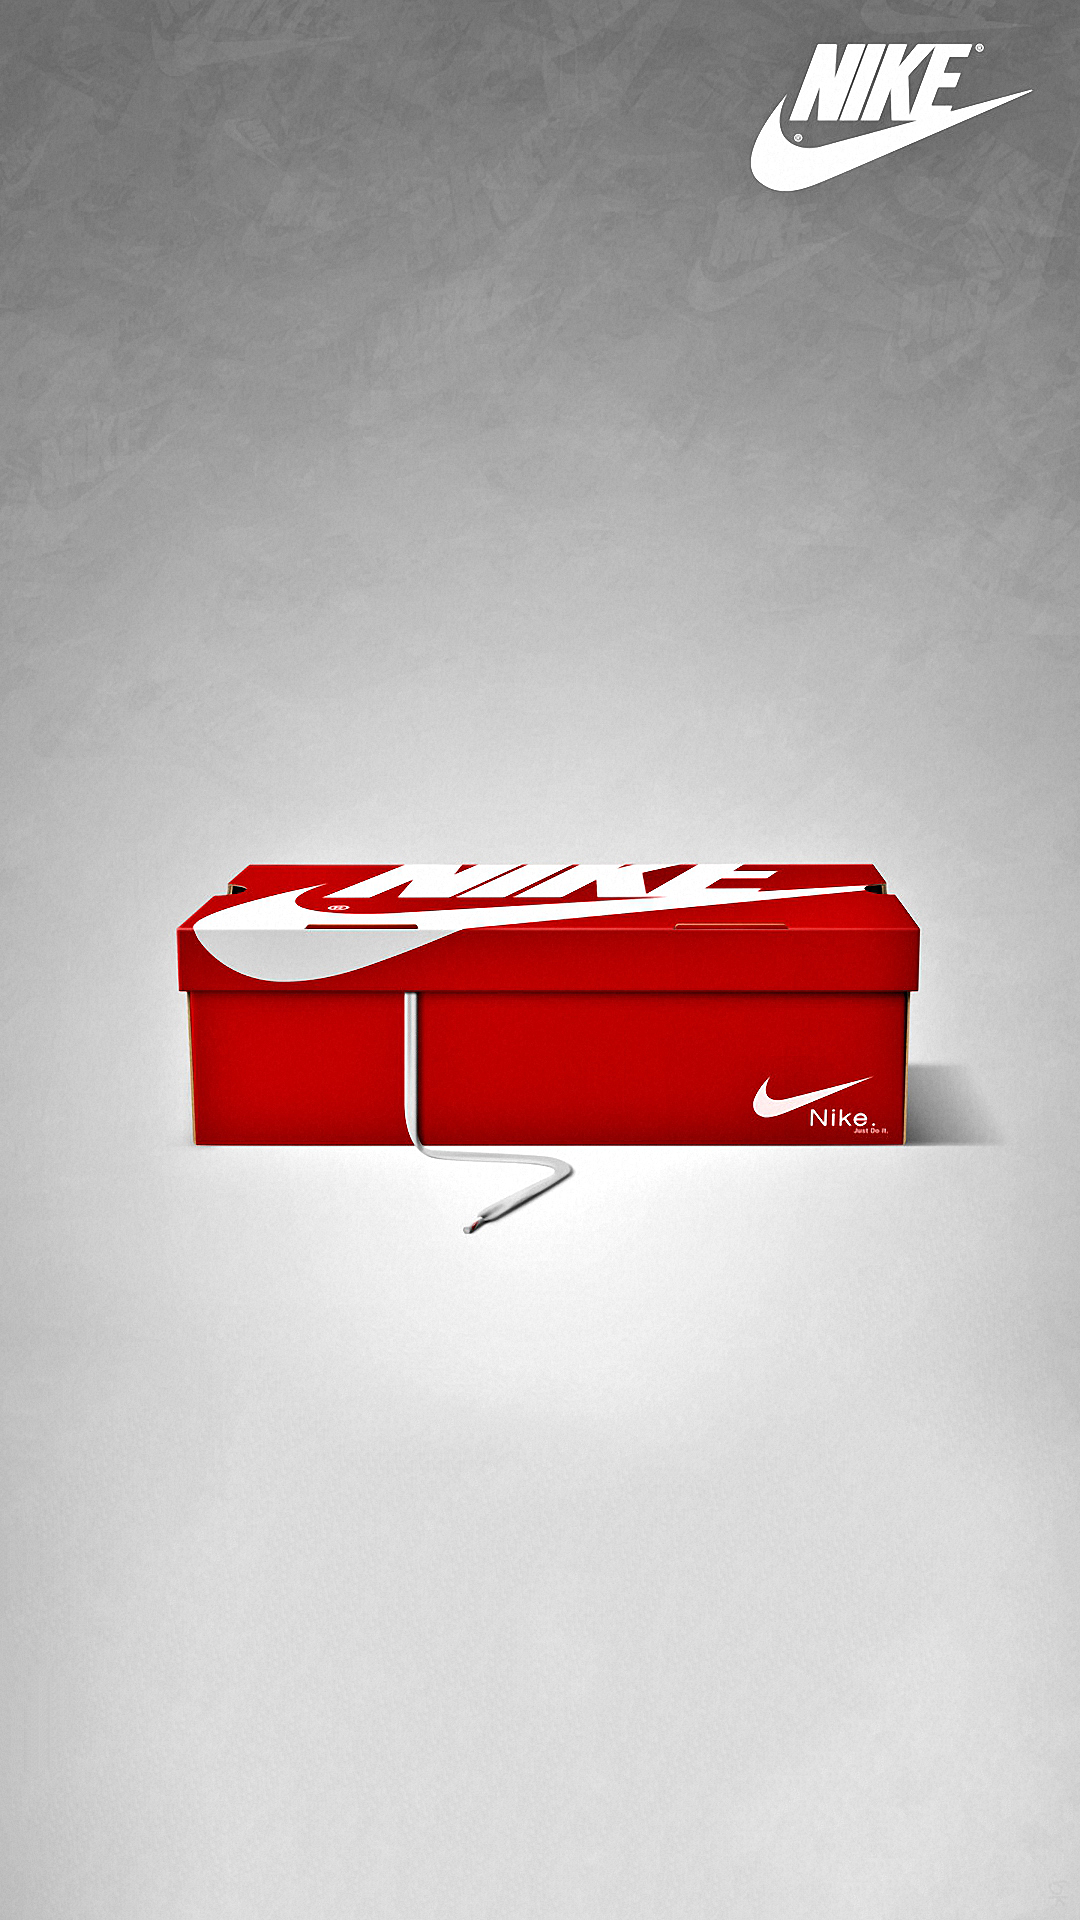 Nike Image for iPhone HD